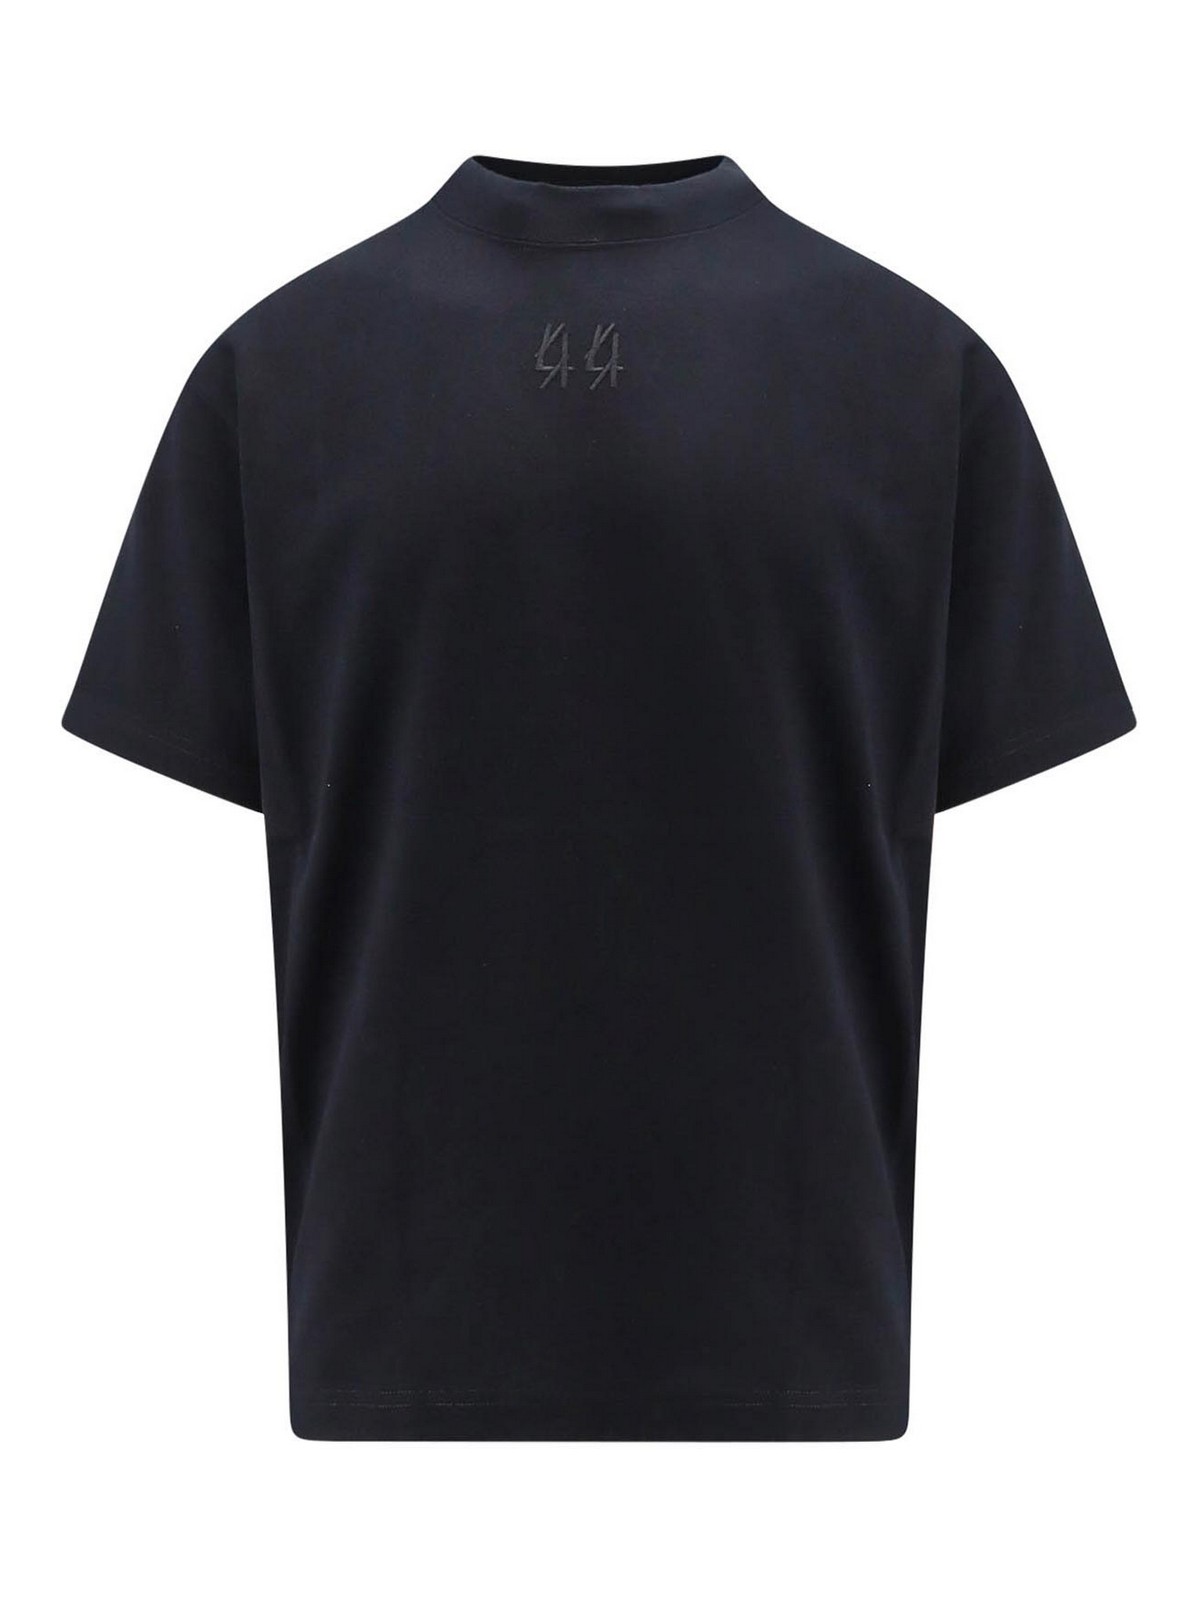 44 Label Group Classic Tee In Black